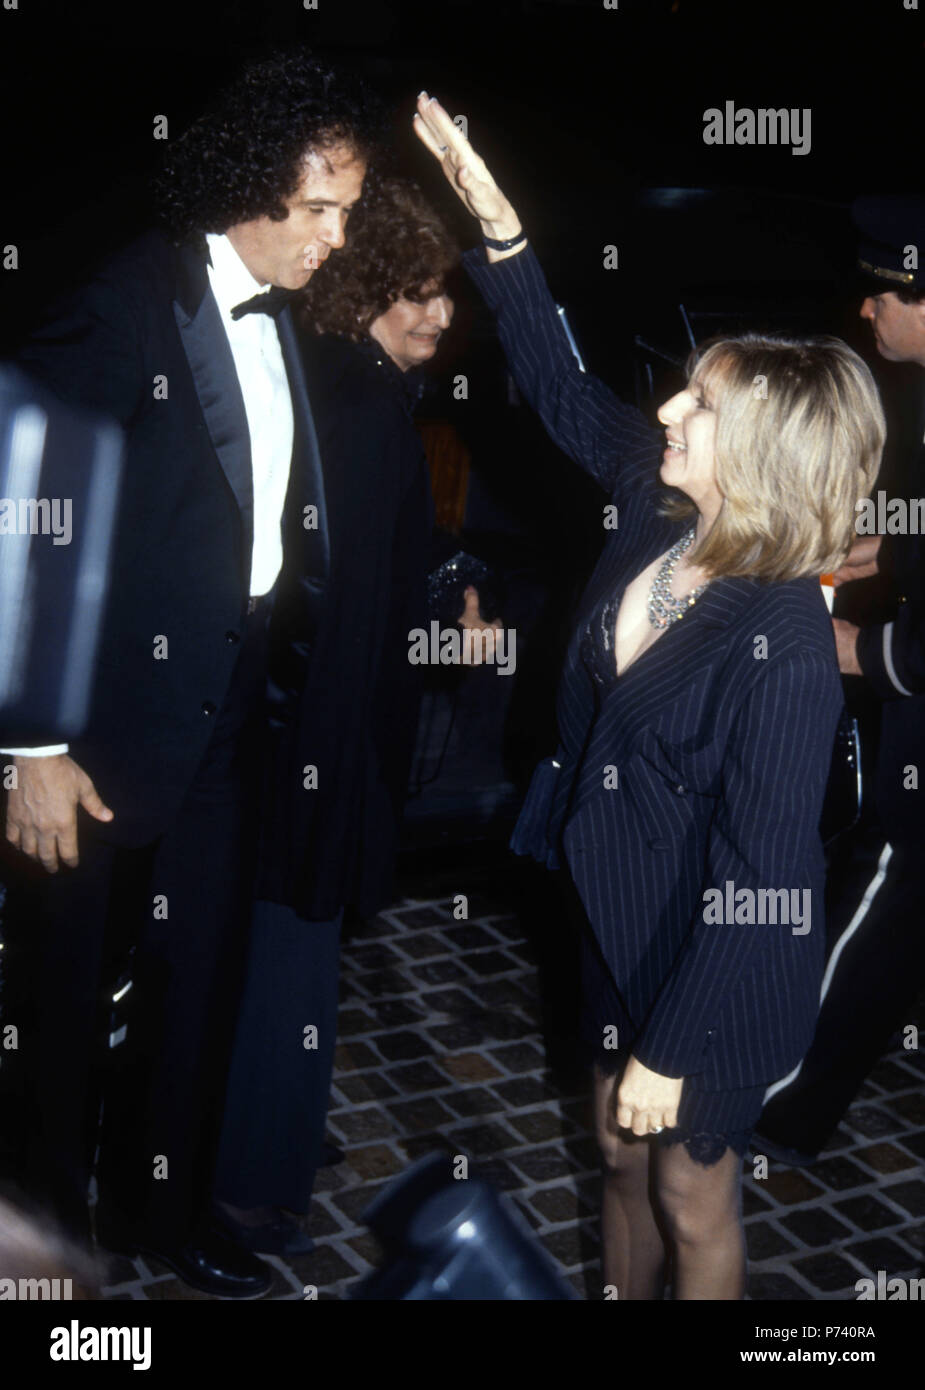 BEVERLY HILLS, CA - JANUARY 18: (L-R) Composer Richard Baskin and Singer/actress Barbra Streisand attend the 49th Annual Golden Globe Awards on January 18, 1992 at the Beverly Hilton Hotel in Beverly Hills, California. Photo by Barry King/Alamy Stock Photo Stock Photo